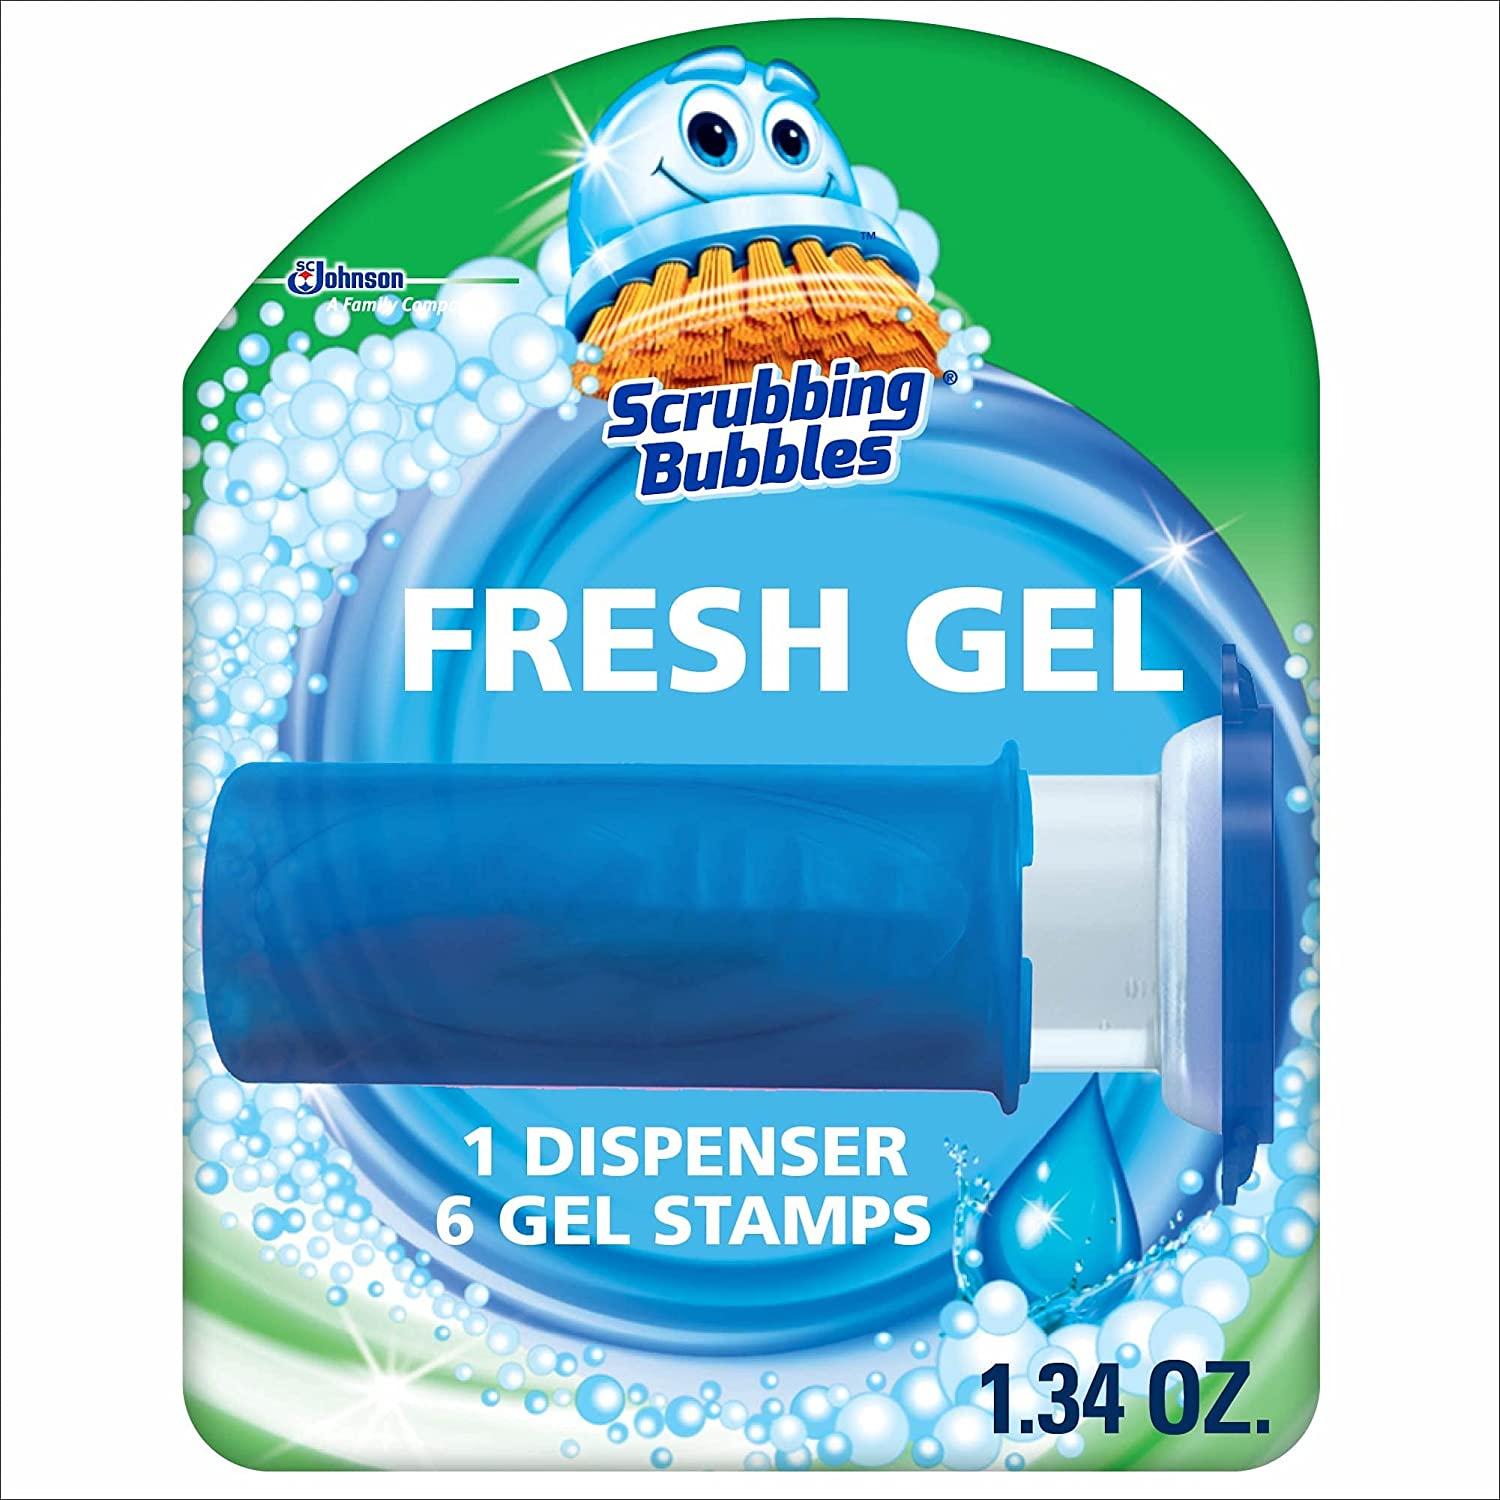 Scrubbing Bubbles Fresh Gel Toilet Bowl Cleaning Stamps for $2.62 Shipped